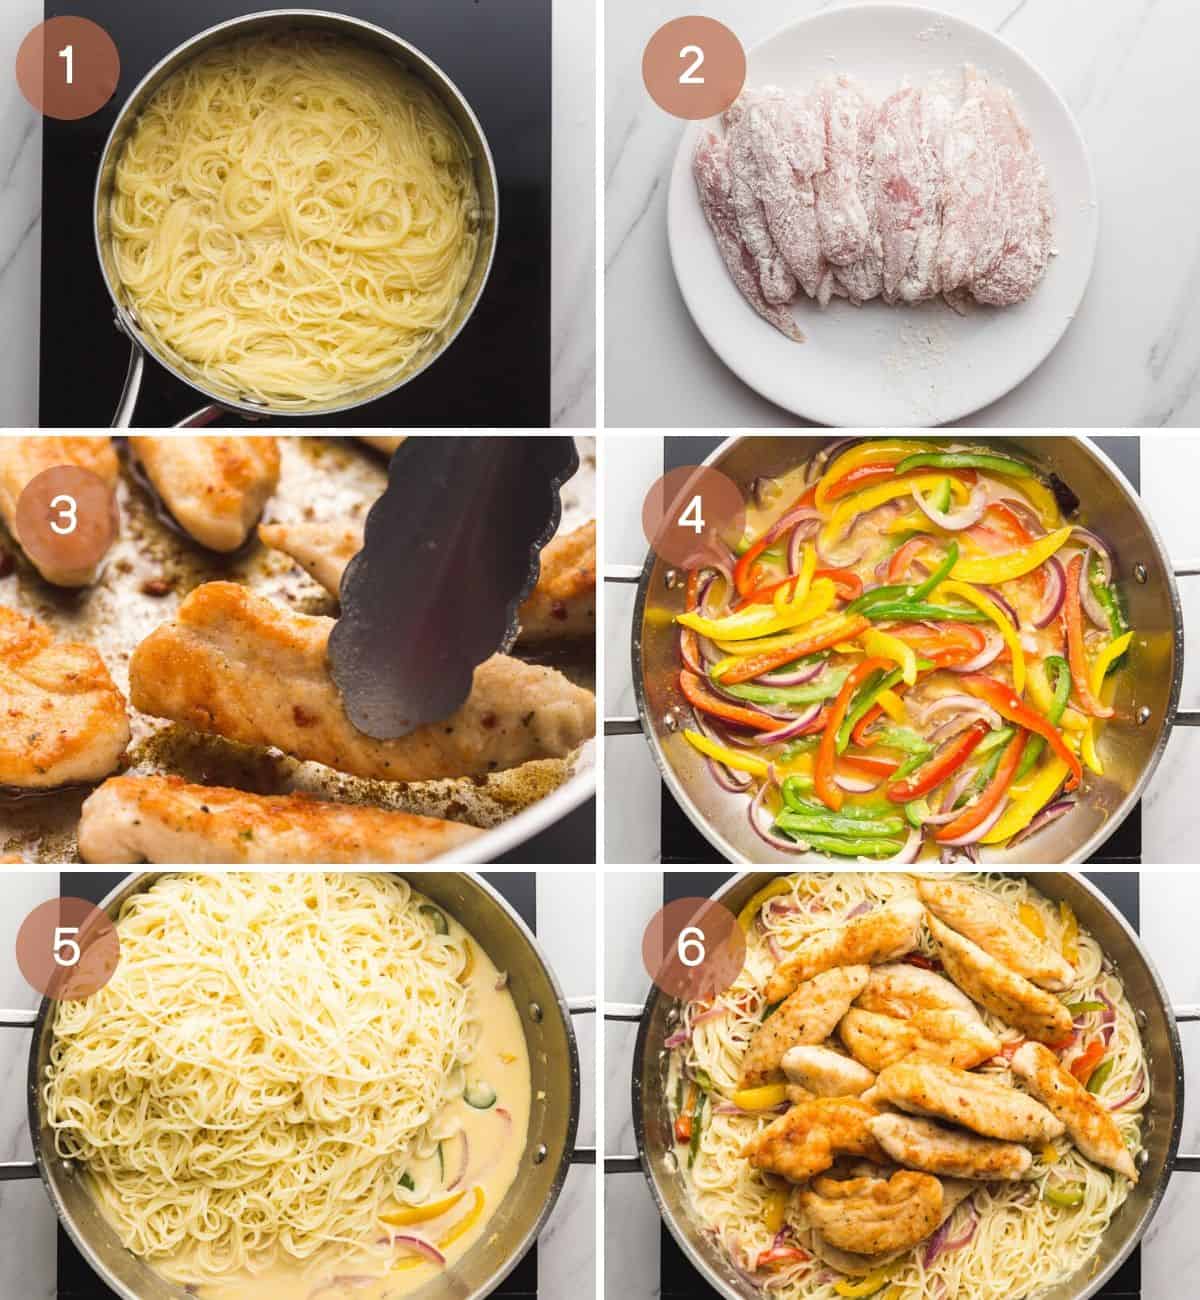 Steps on how to make chicken scampi